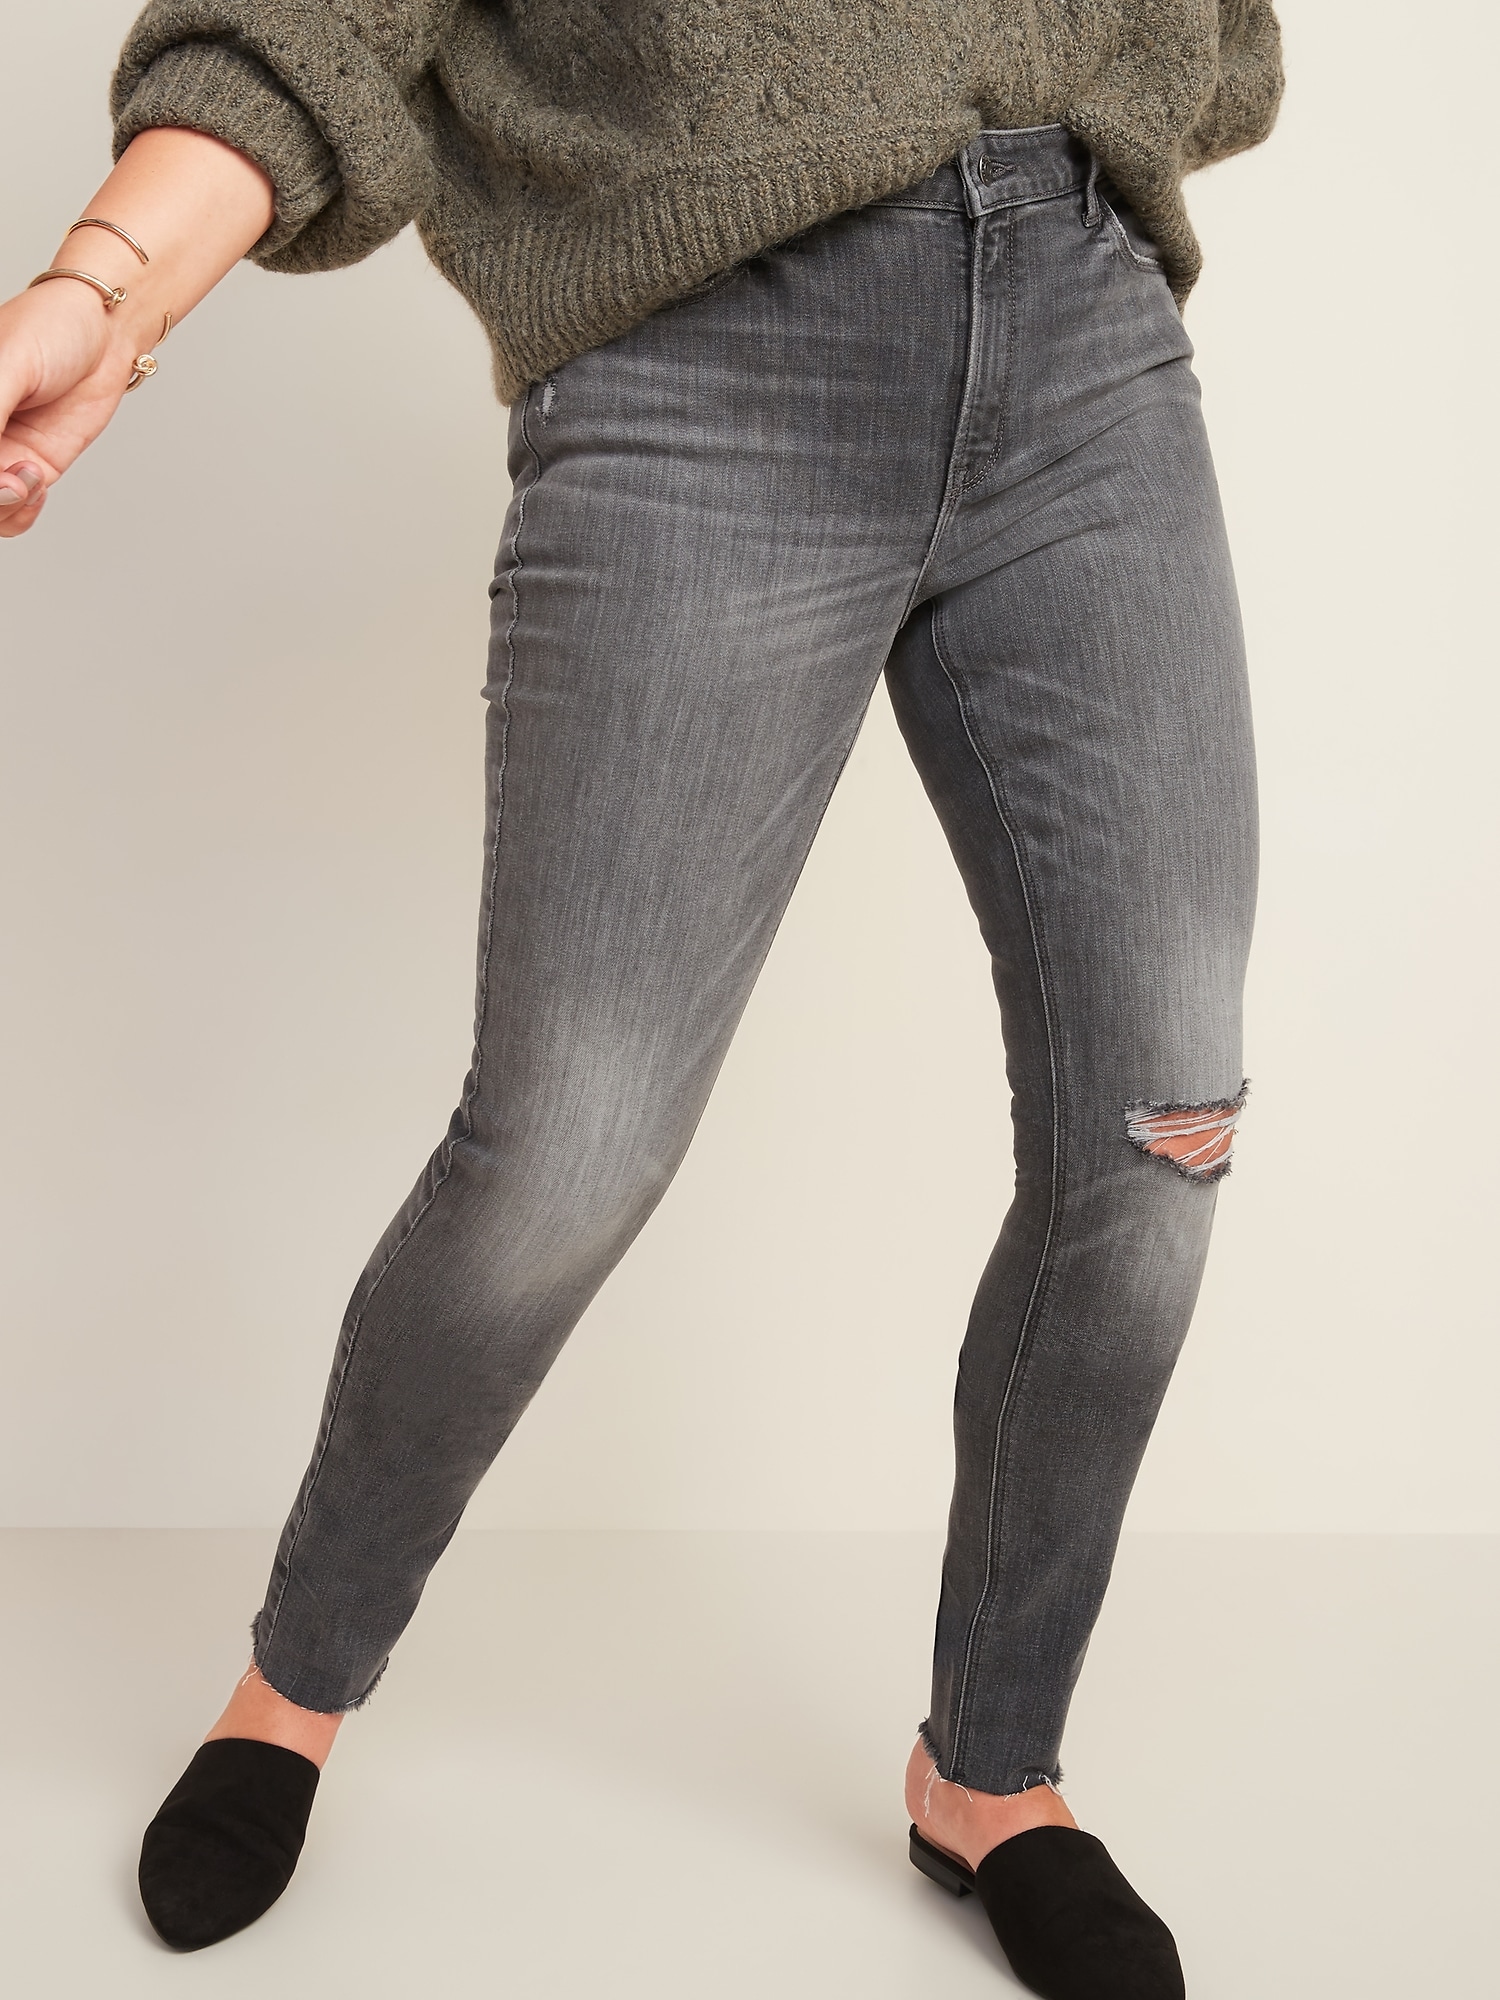 Mid-Rise Rockstar Super Skinny Ripped Gray Cut-Off Jeans for Women